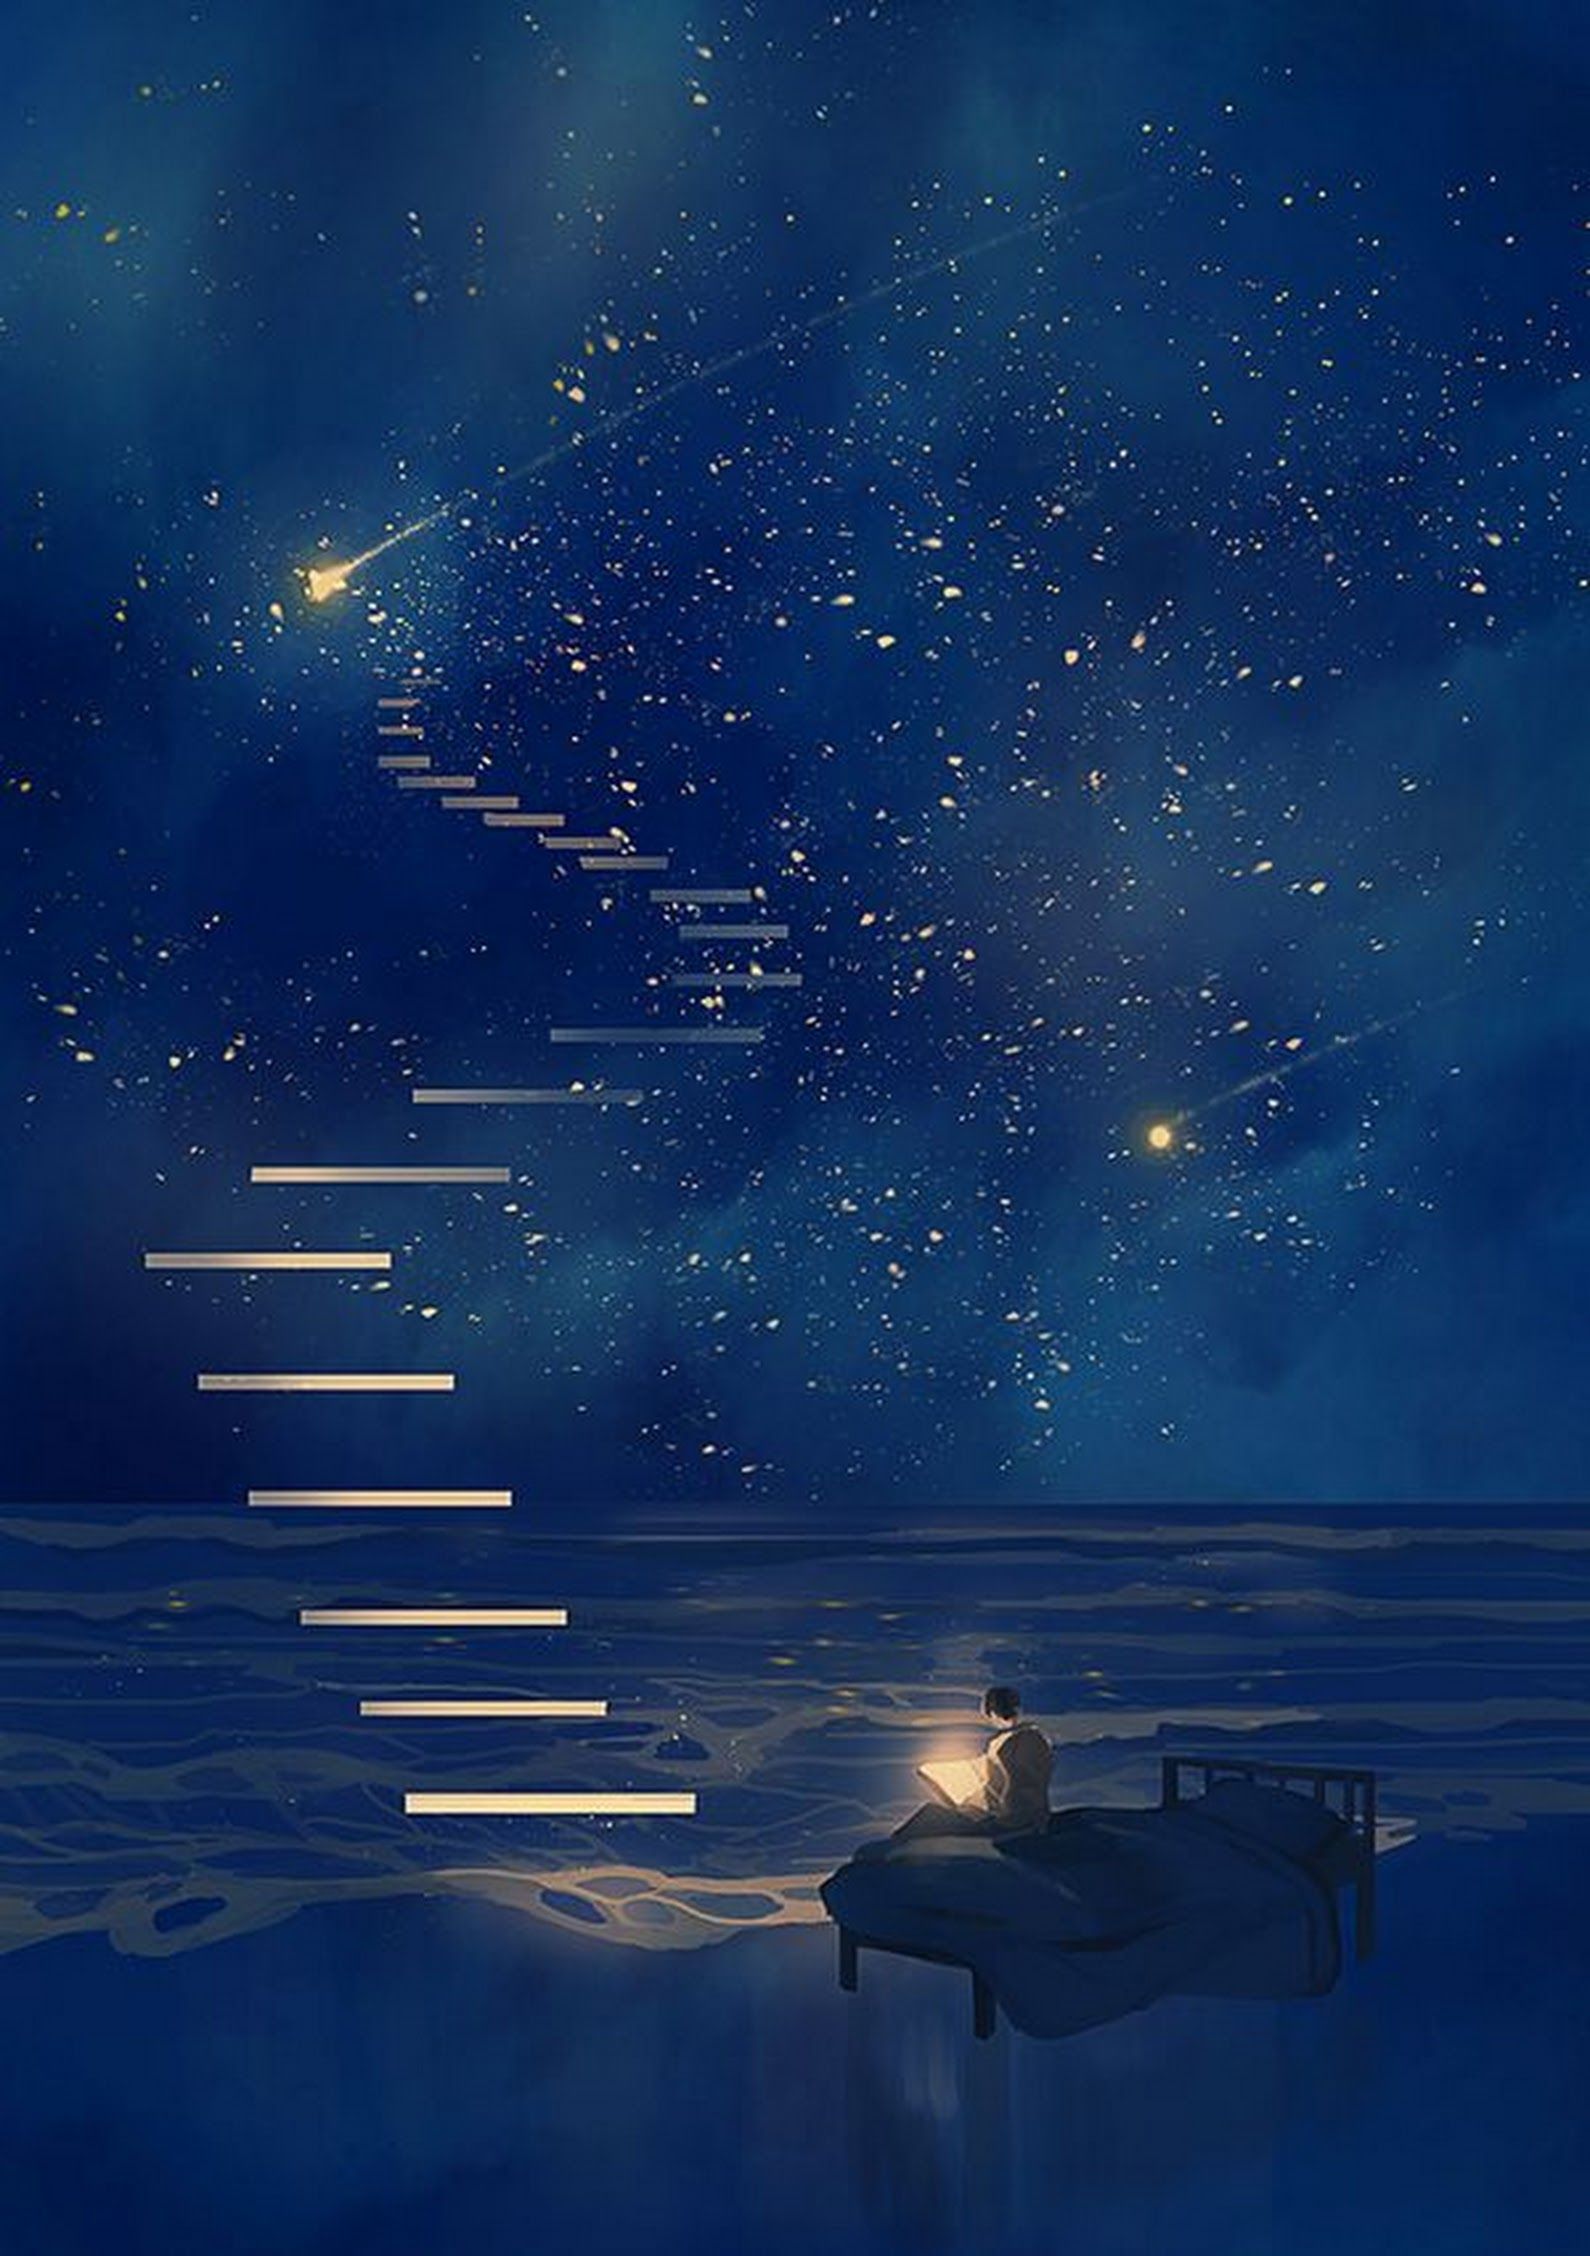 A boy standing on a pier holding a lantern looking at a ladder reaching into the stars - Constellation